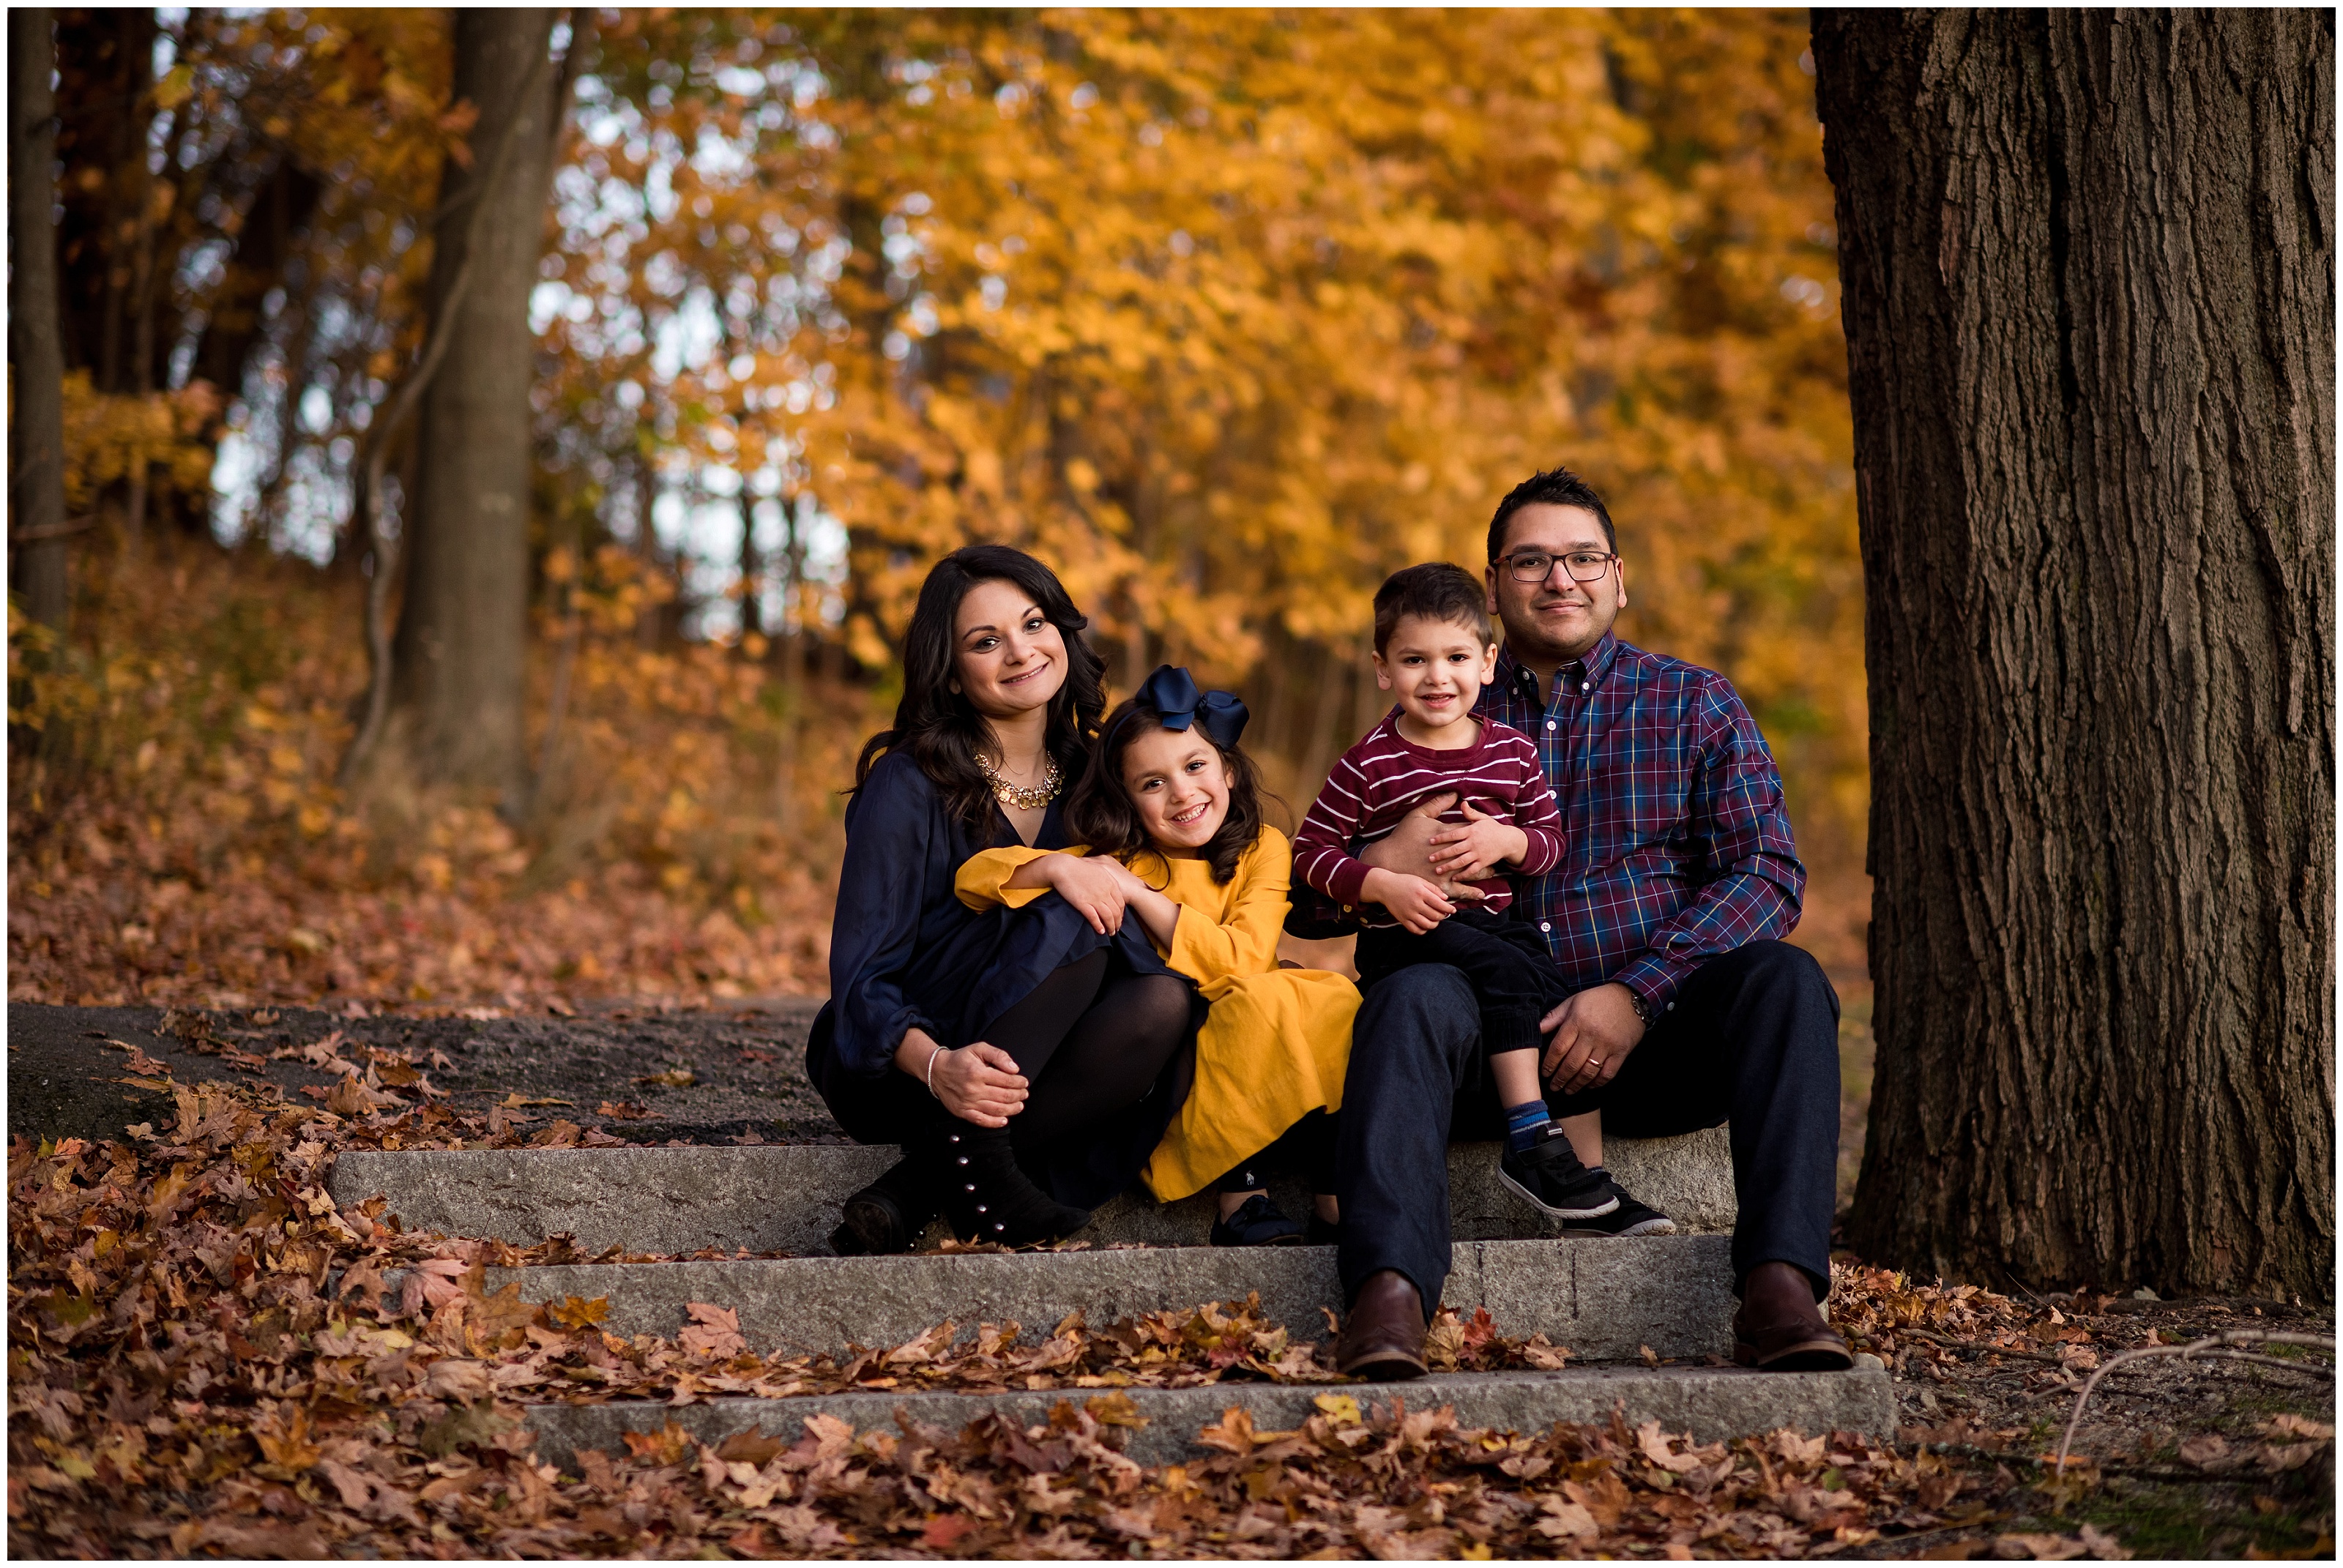 22-outdoor-fall-family-photo-outfits